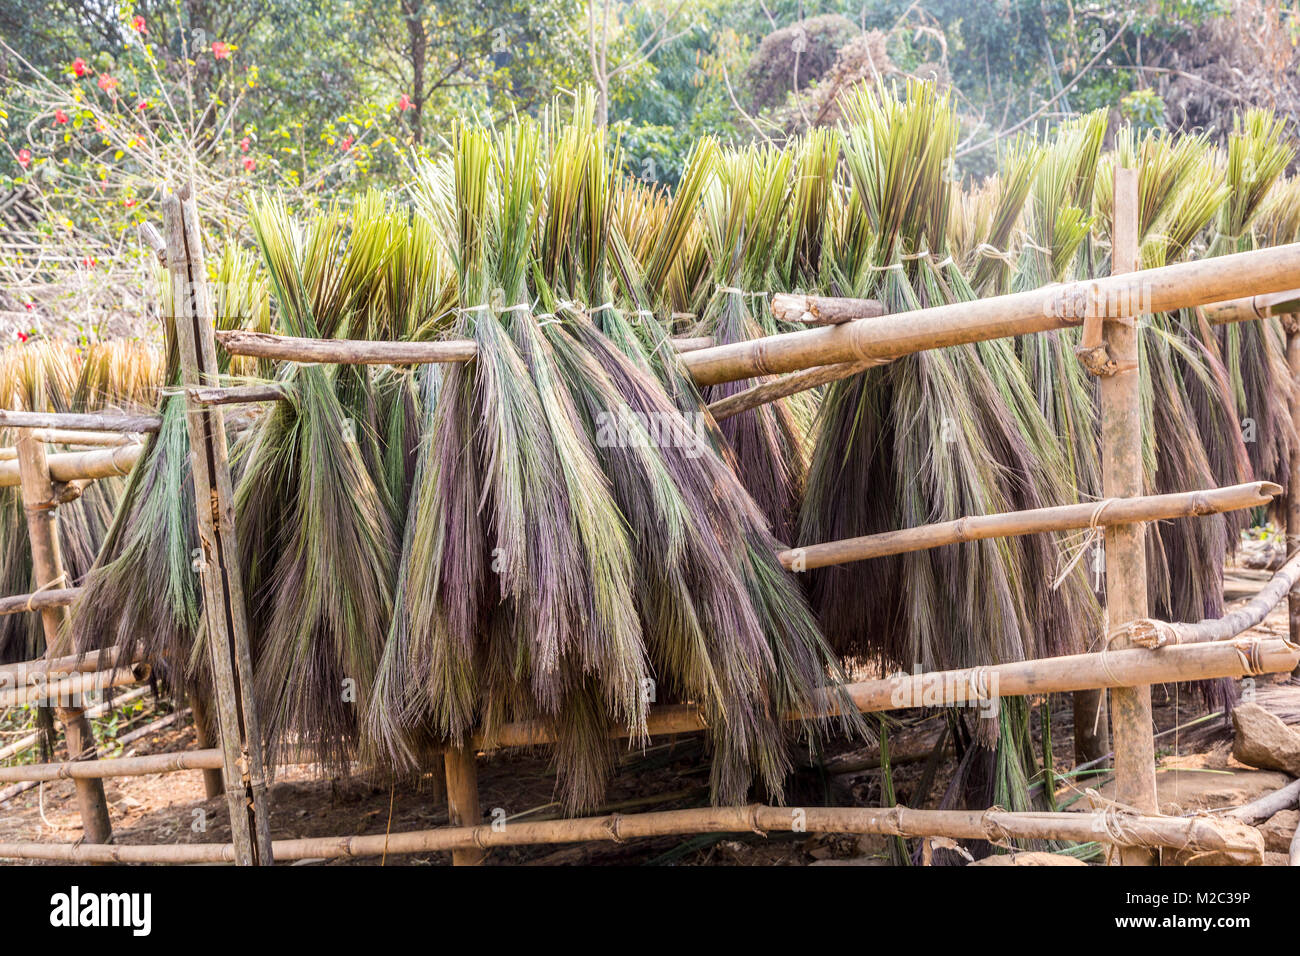 Drying grass in the sun to make traditional brooms, Meghalaya, India Stock Photo